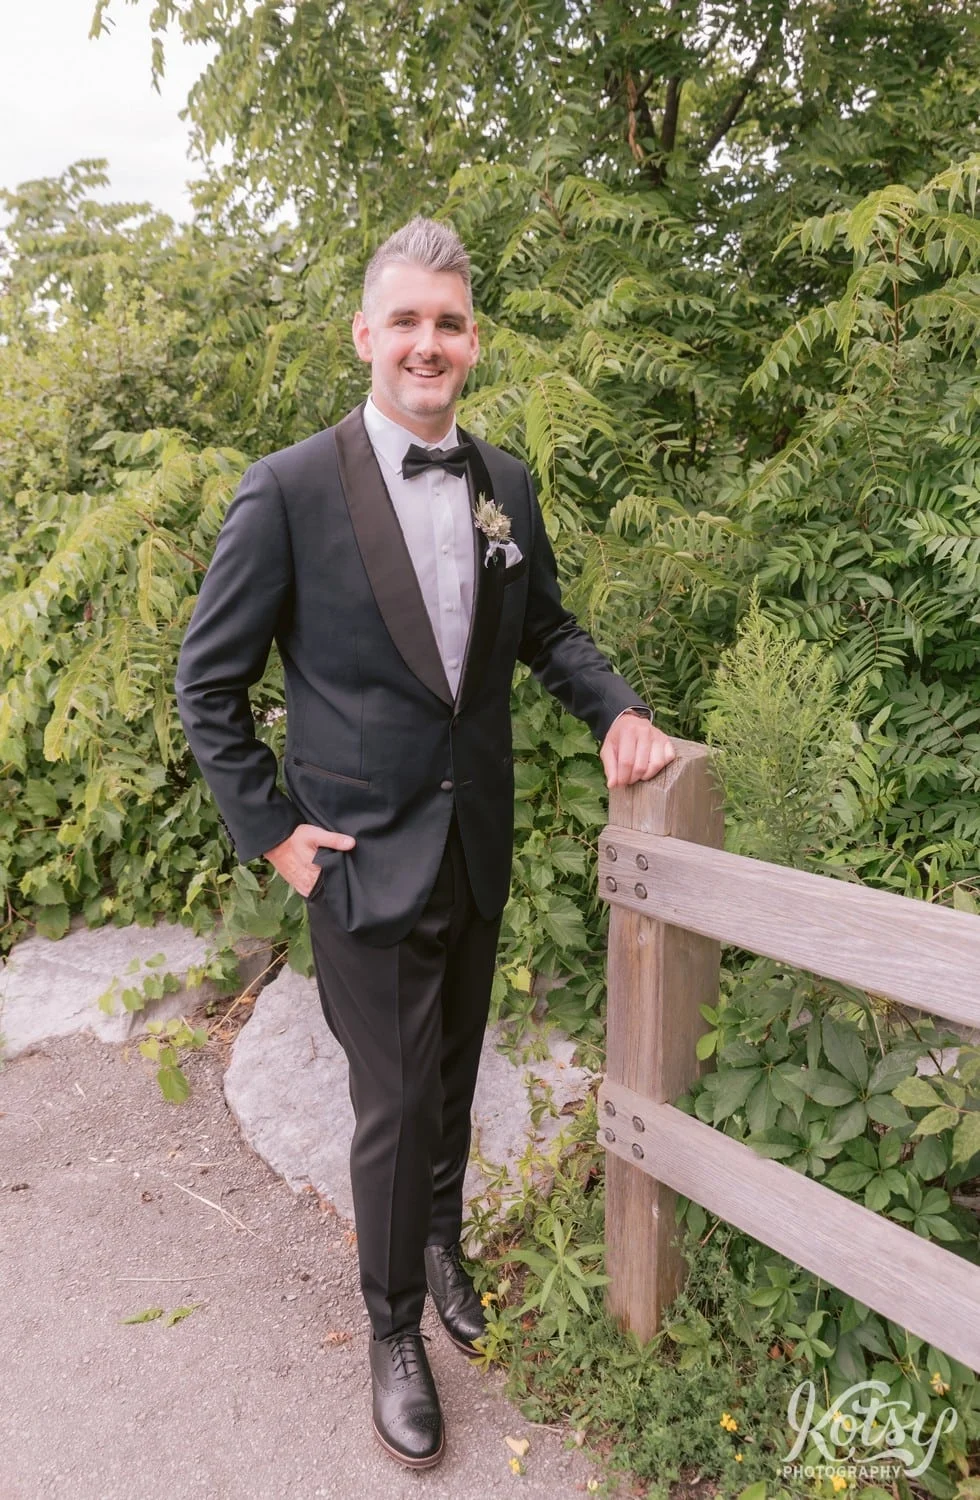 A man in a back tuxedo poses for a photo with one hand in his pocket and the other on a wooden fence post